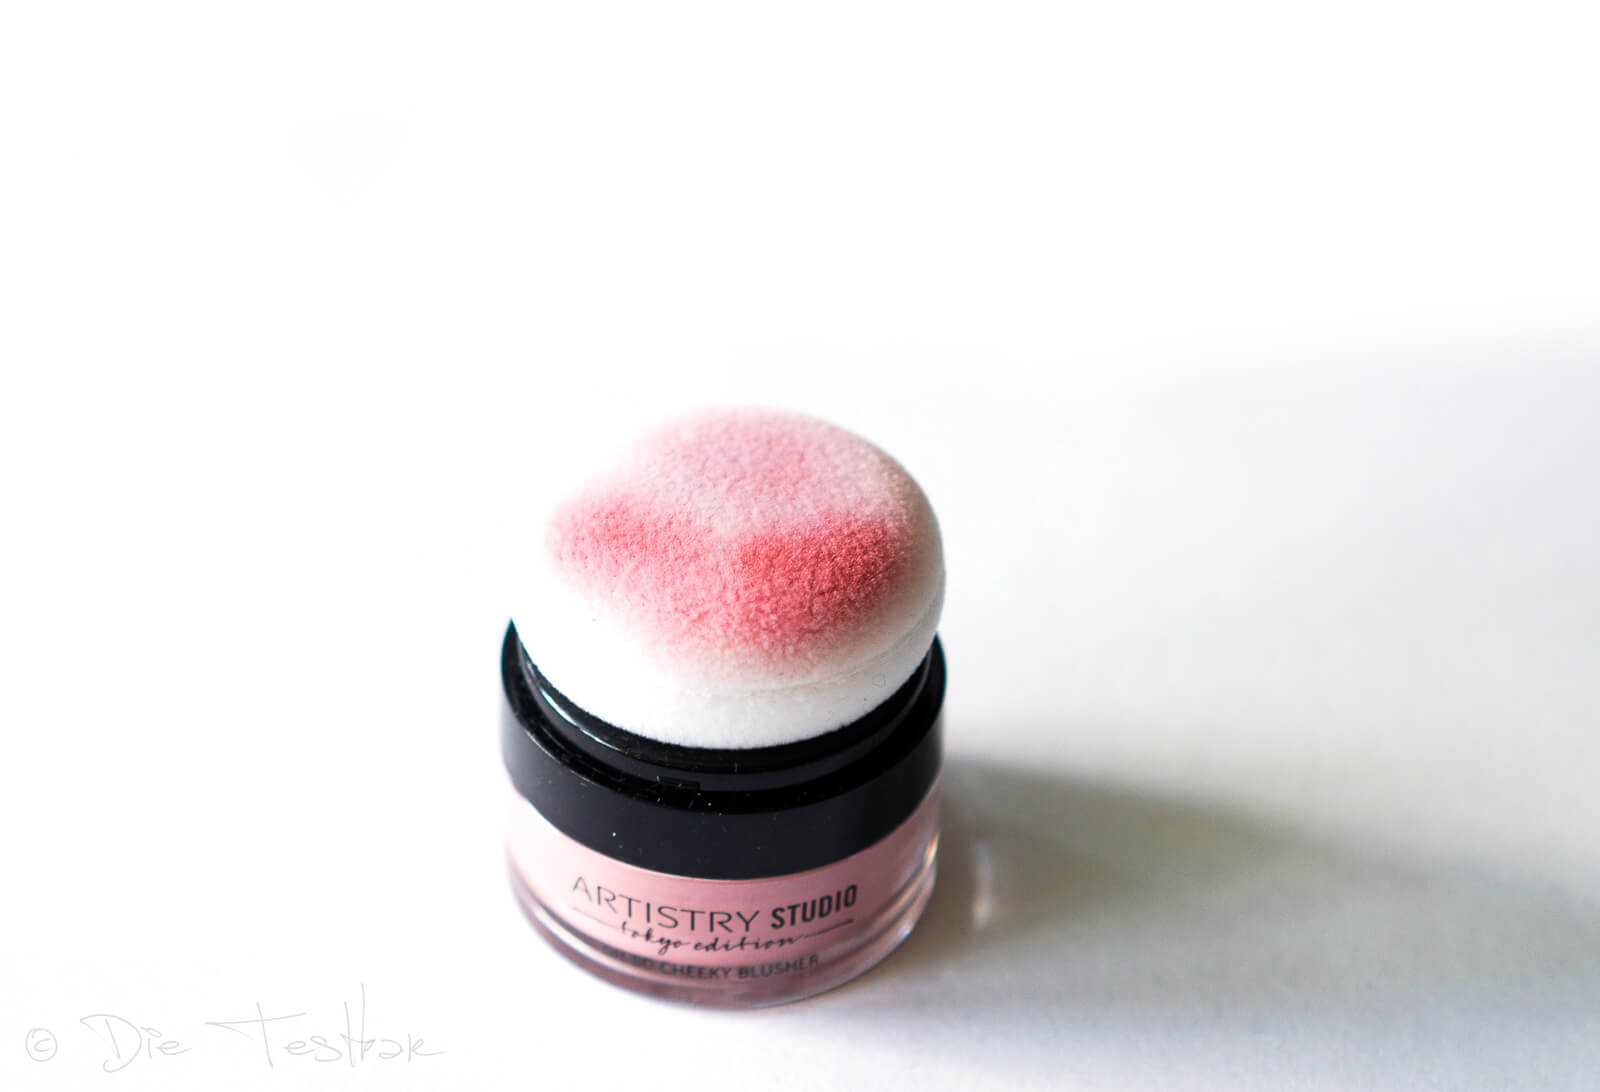 Oh-So-Cheeky Blusher ARTISTRY STUDIO™ Tokyo Edition